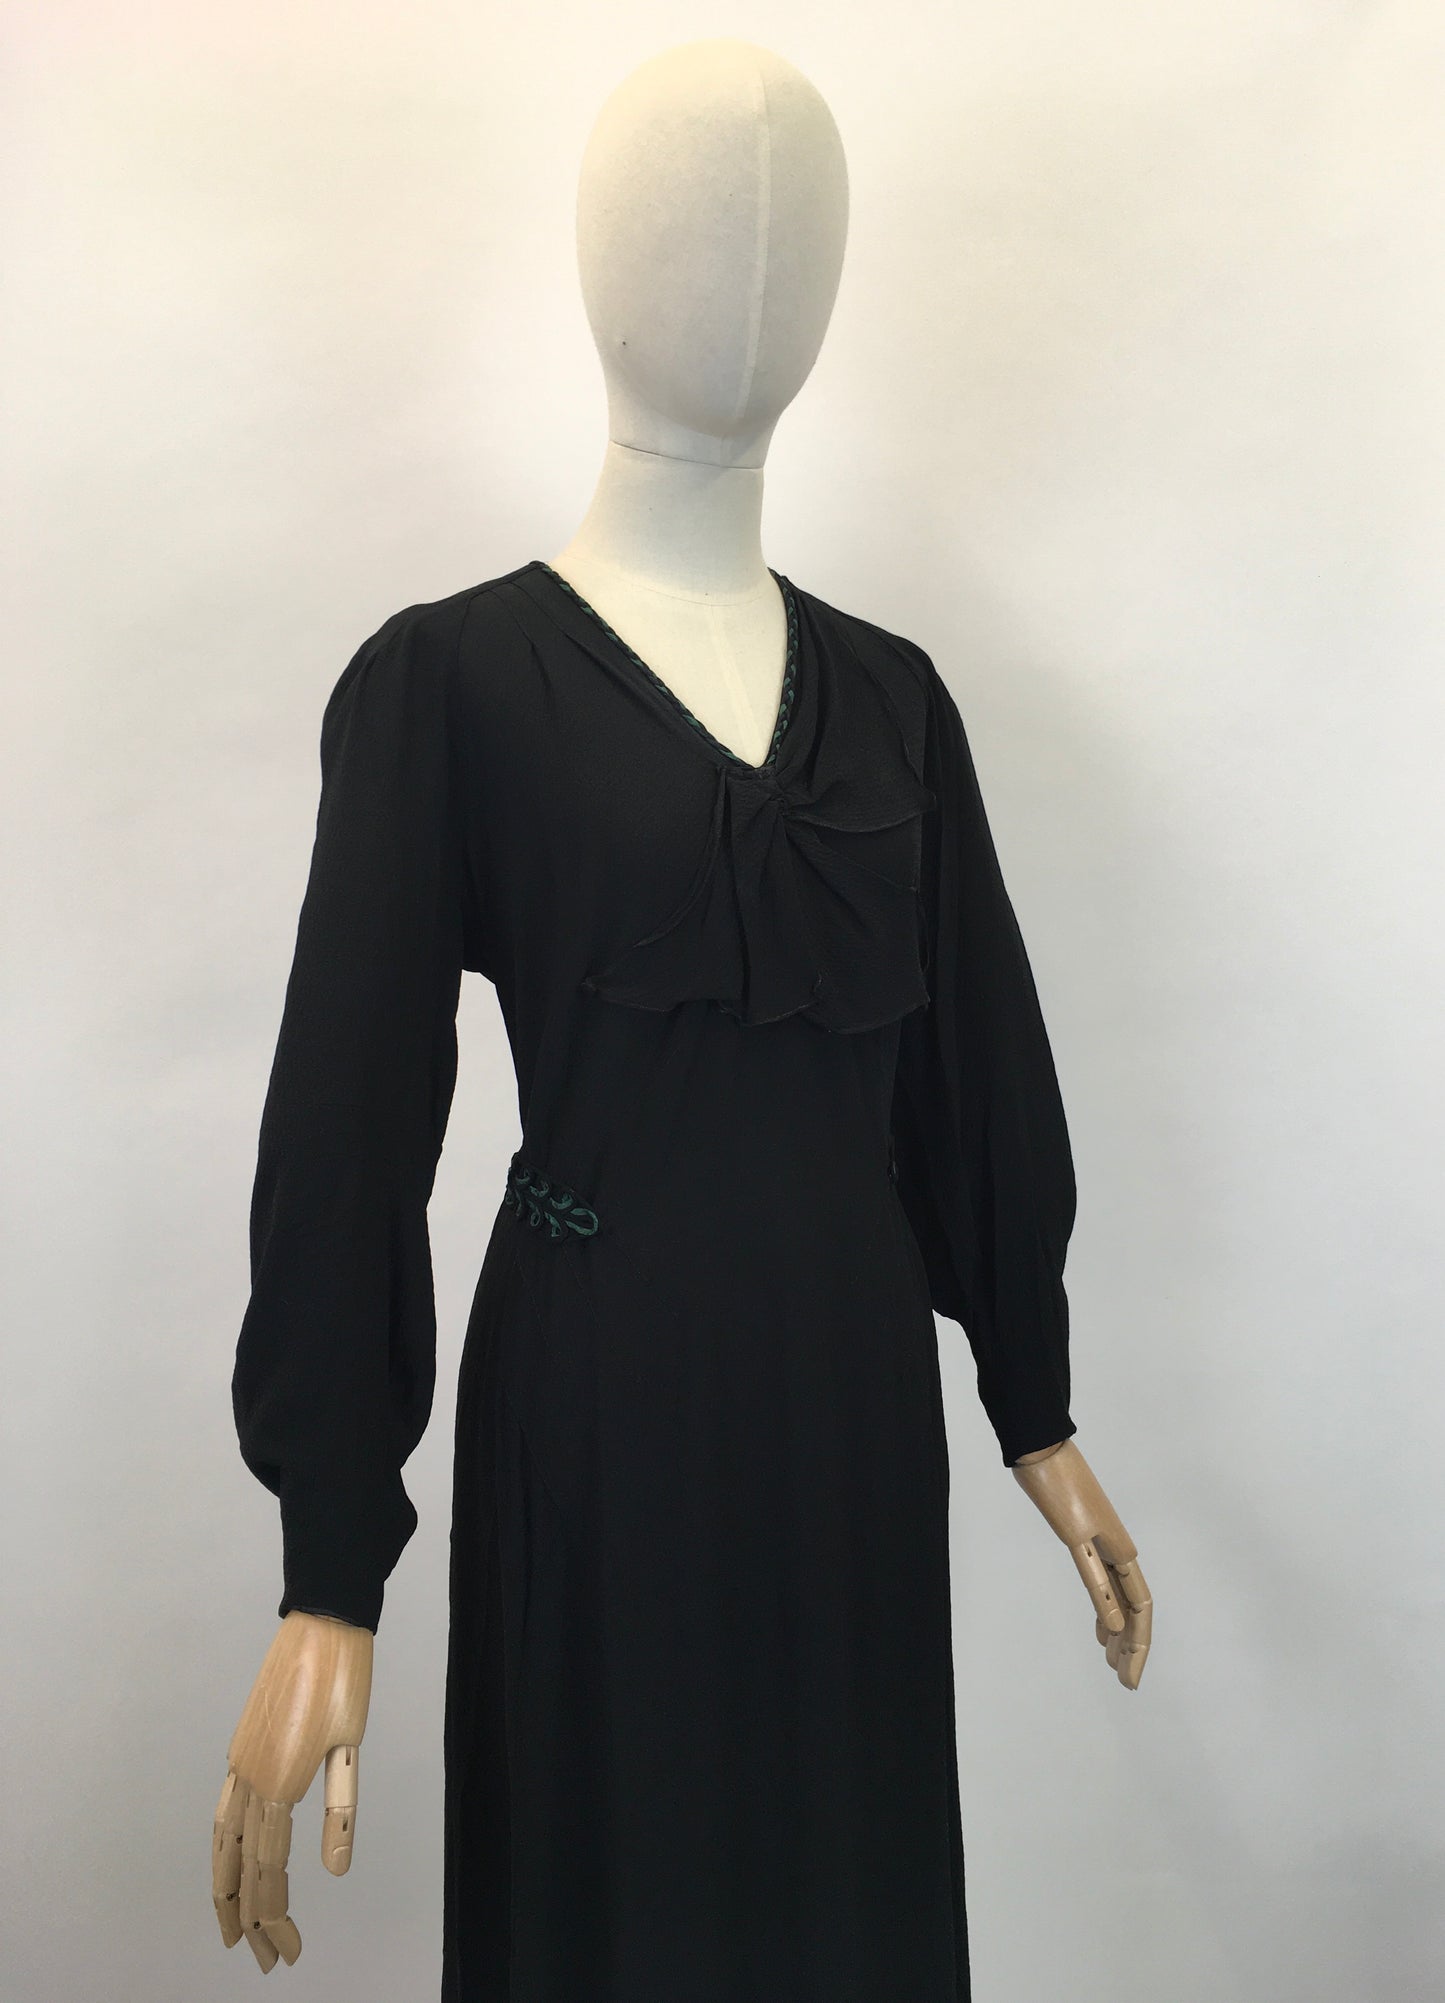 Original 1930's Sensational Evening Dress in Sheer Crepe - In Inky Black with Bottle Green Accents